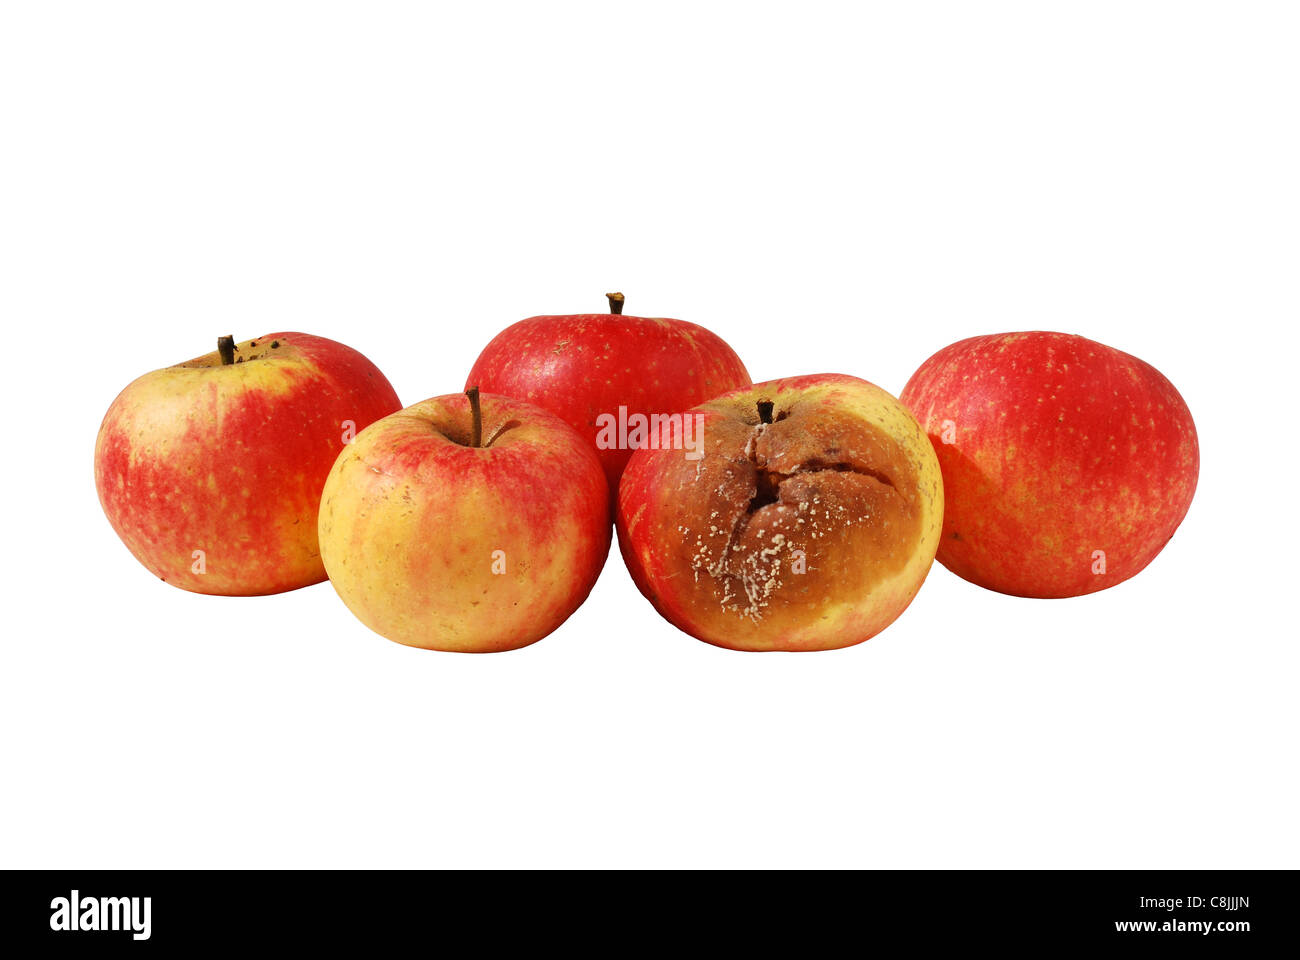 One rotten, bad, decaying apple in bunch of four good apples Stock Photo